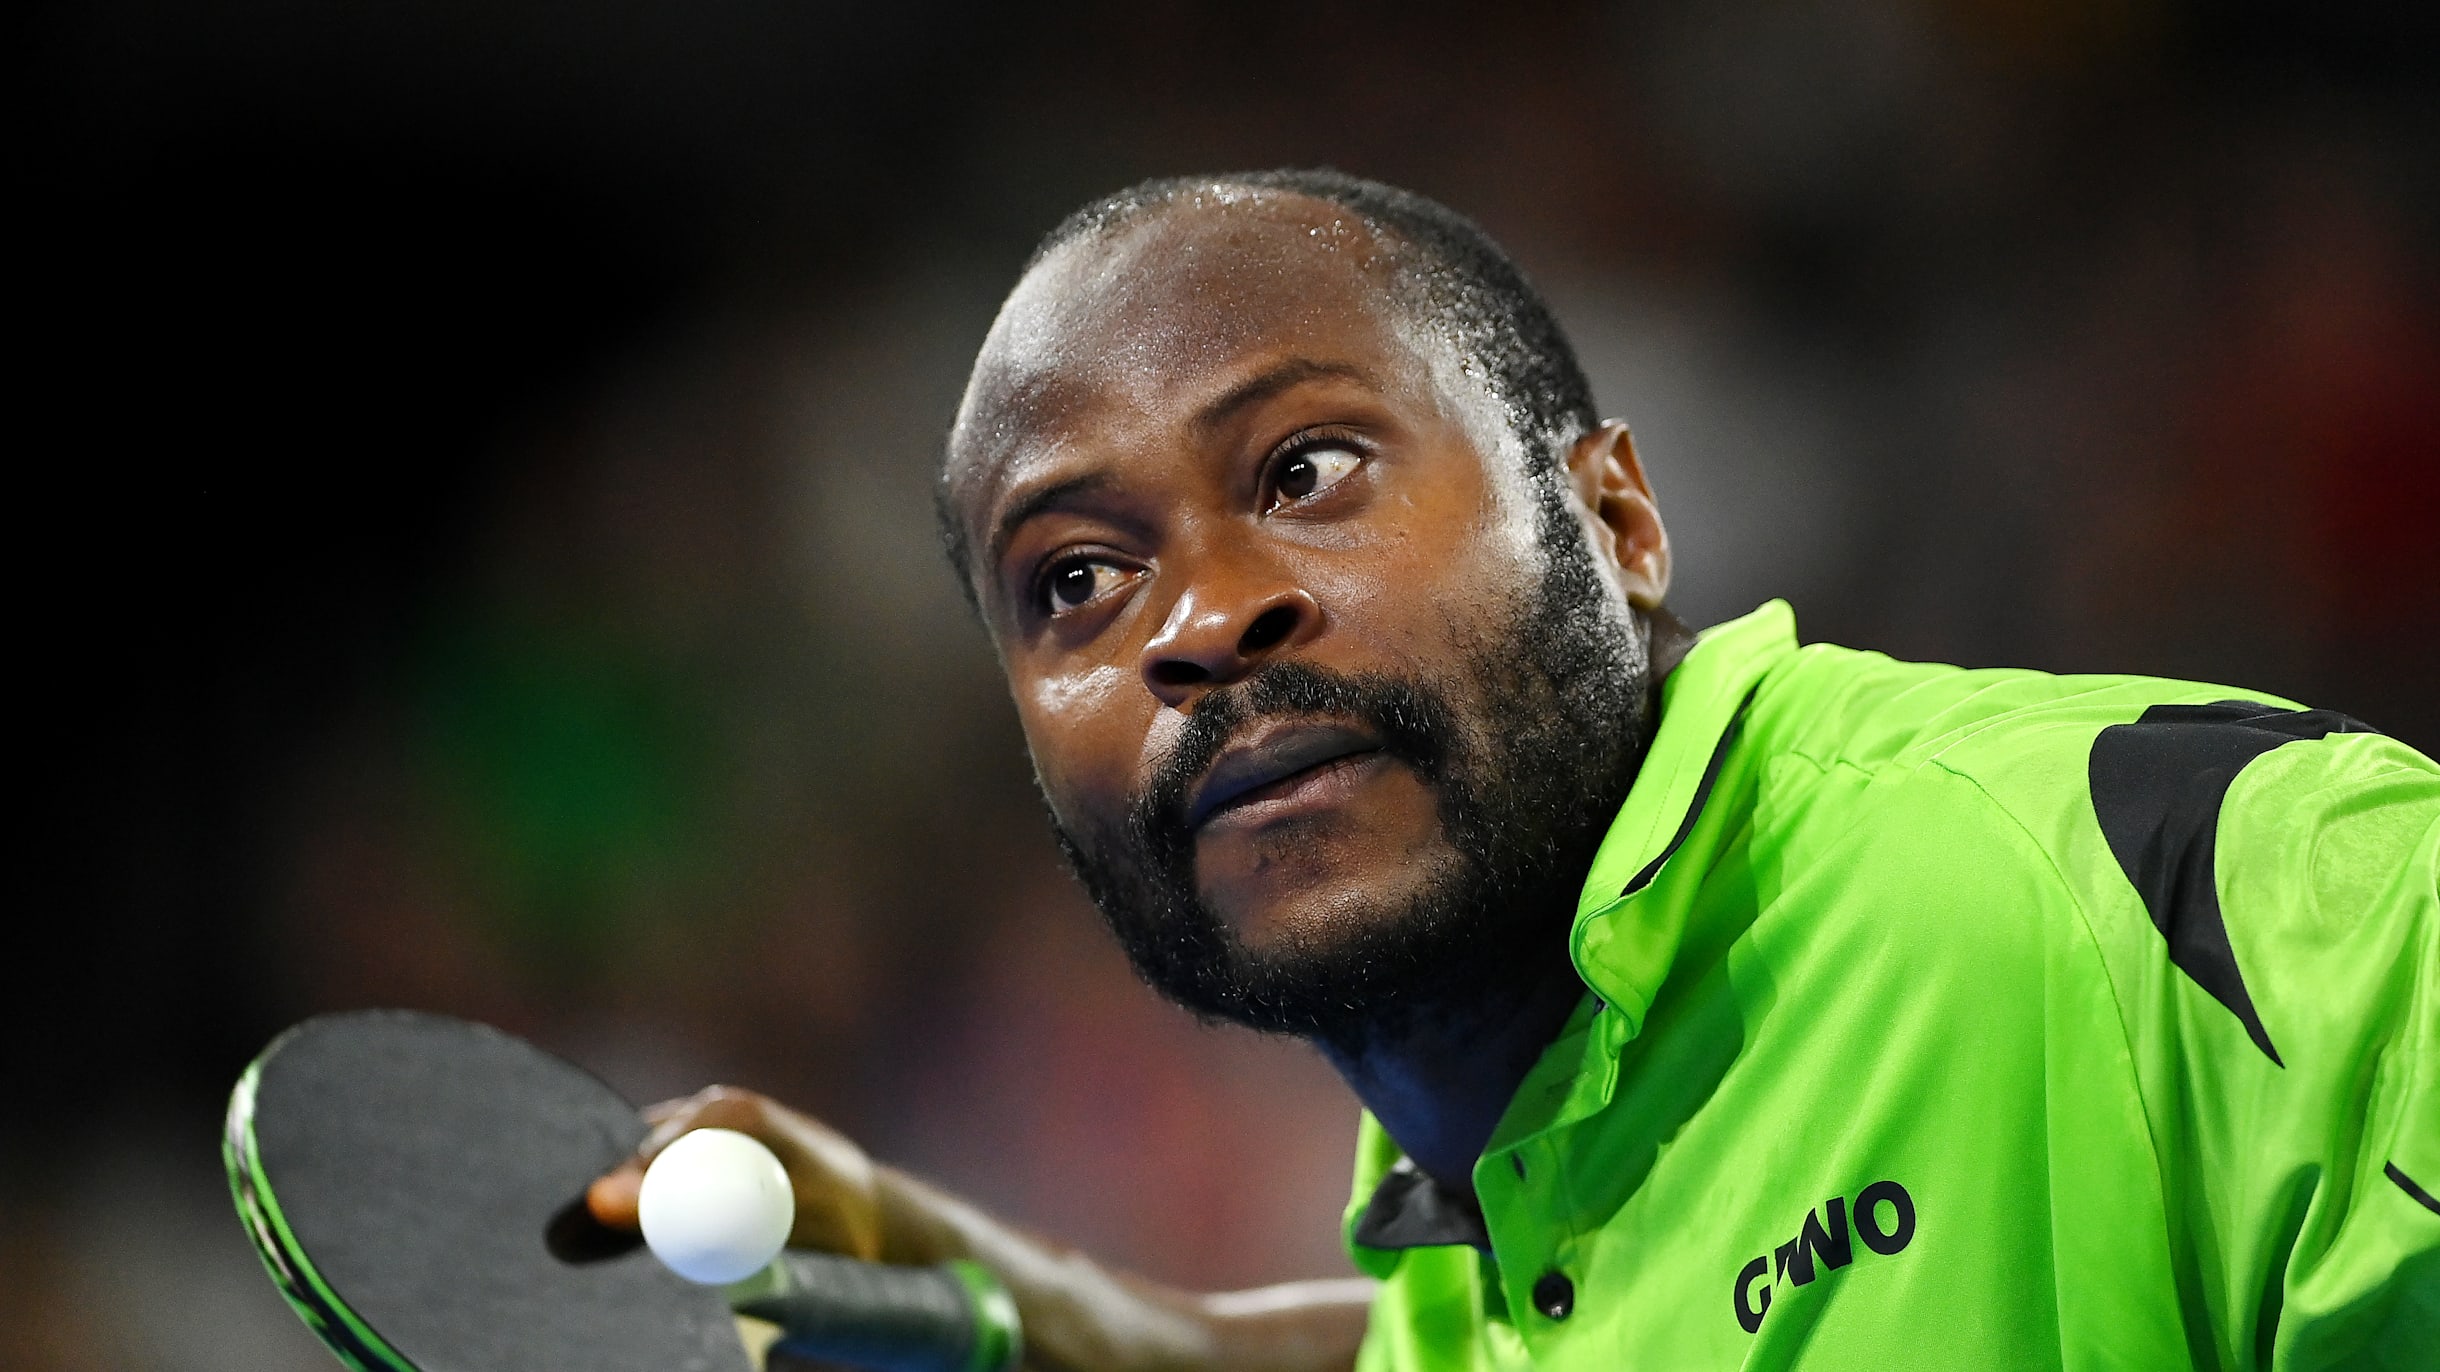 African Table Tennis Championships 2022 preview, schedule, players to watch